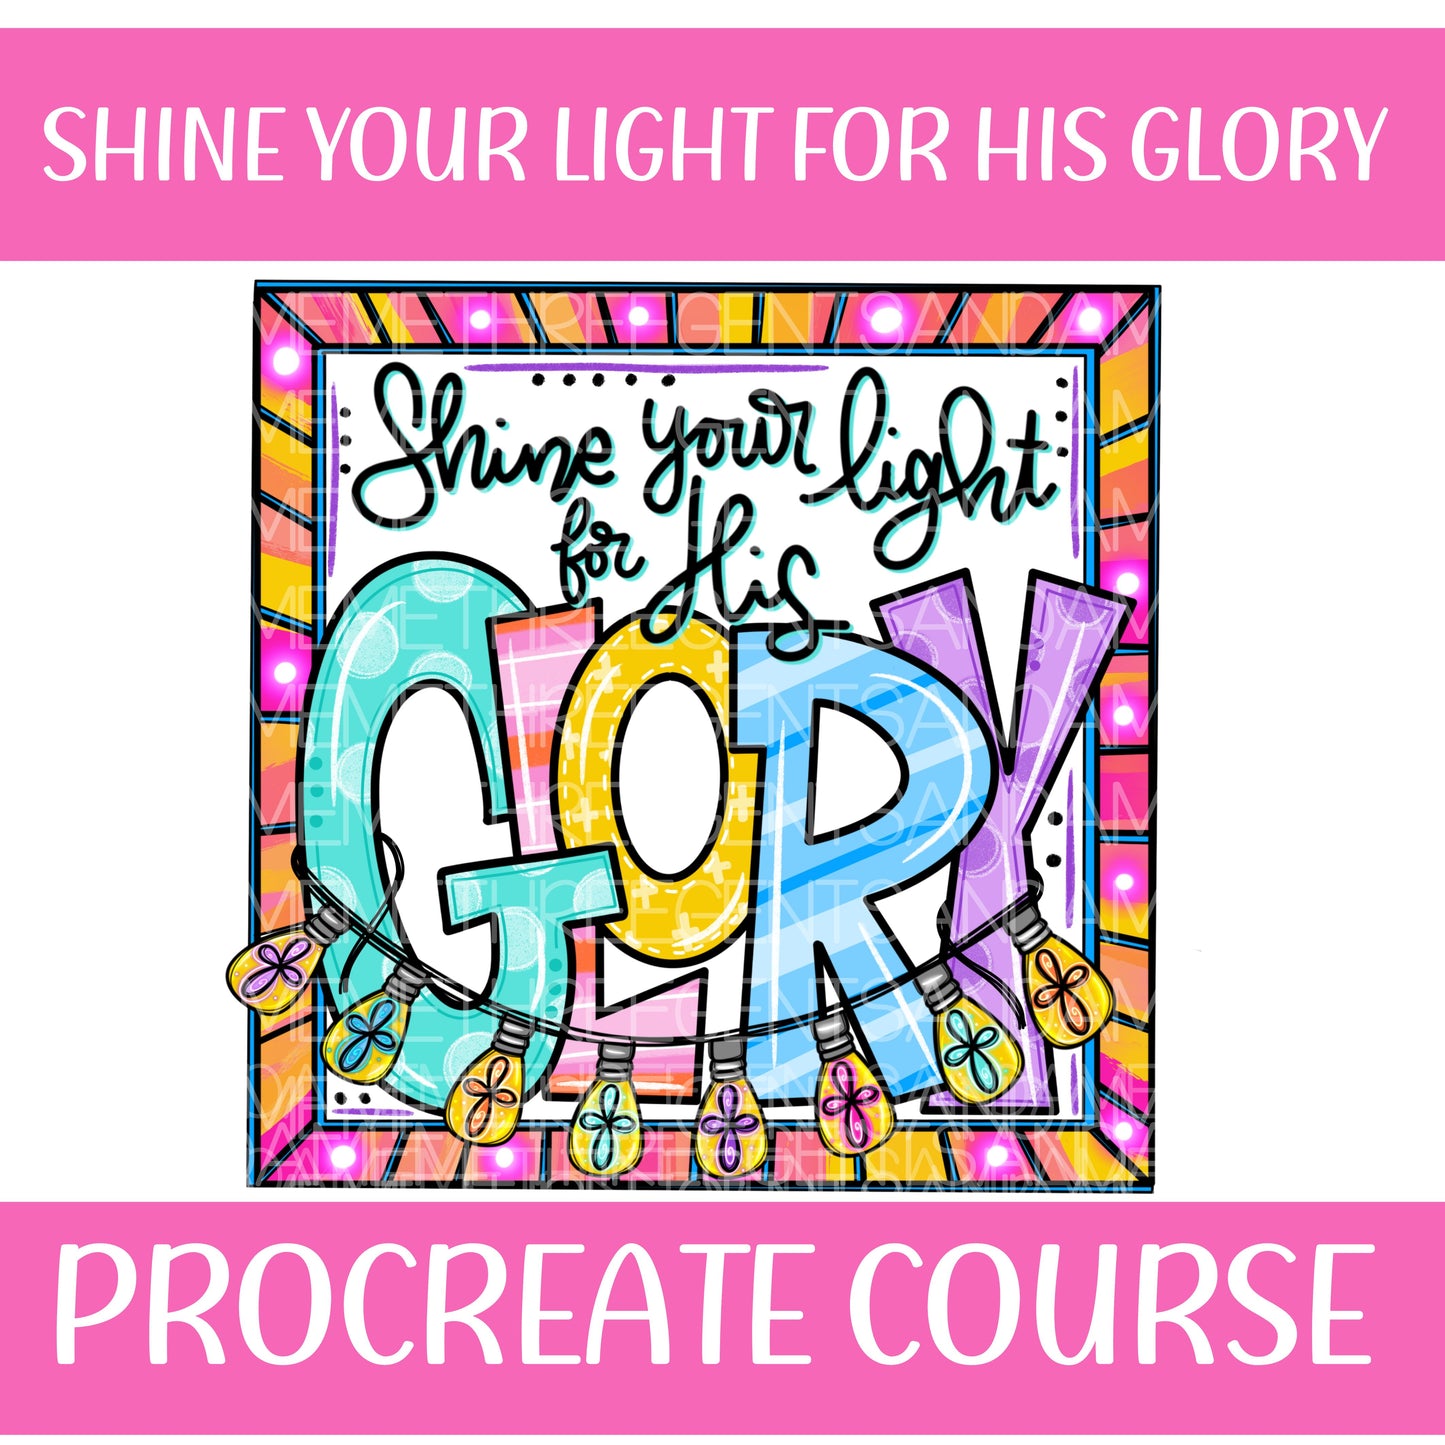 SHINE YOUR LIGHT FOR HIS GLORY PROCREATE COURSE